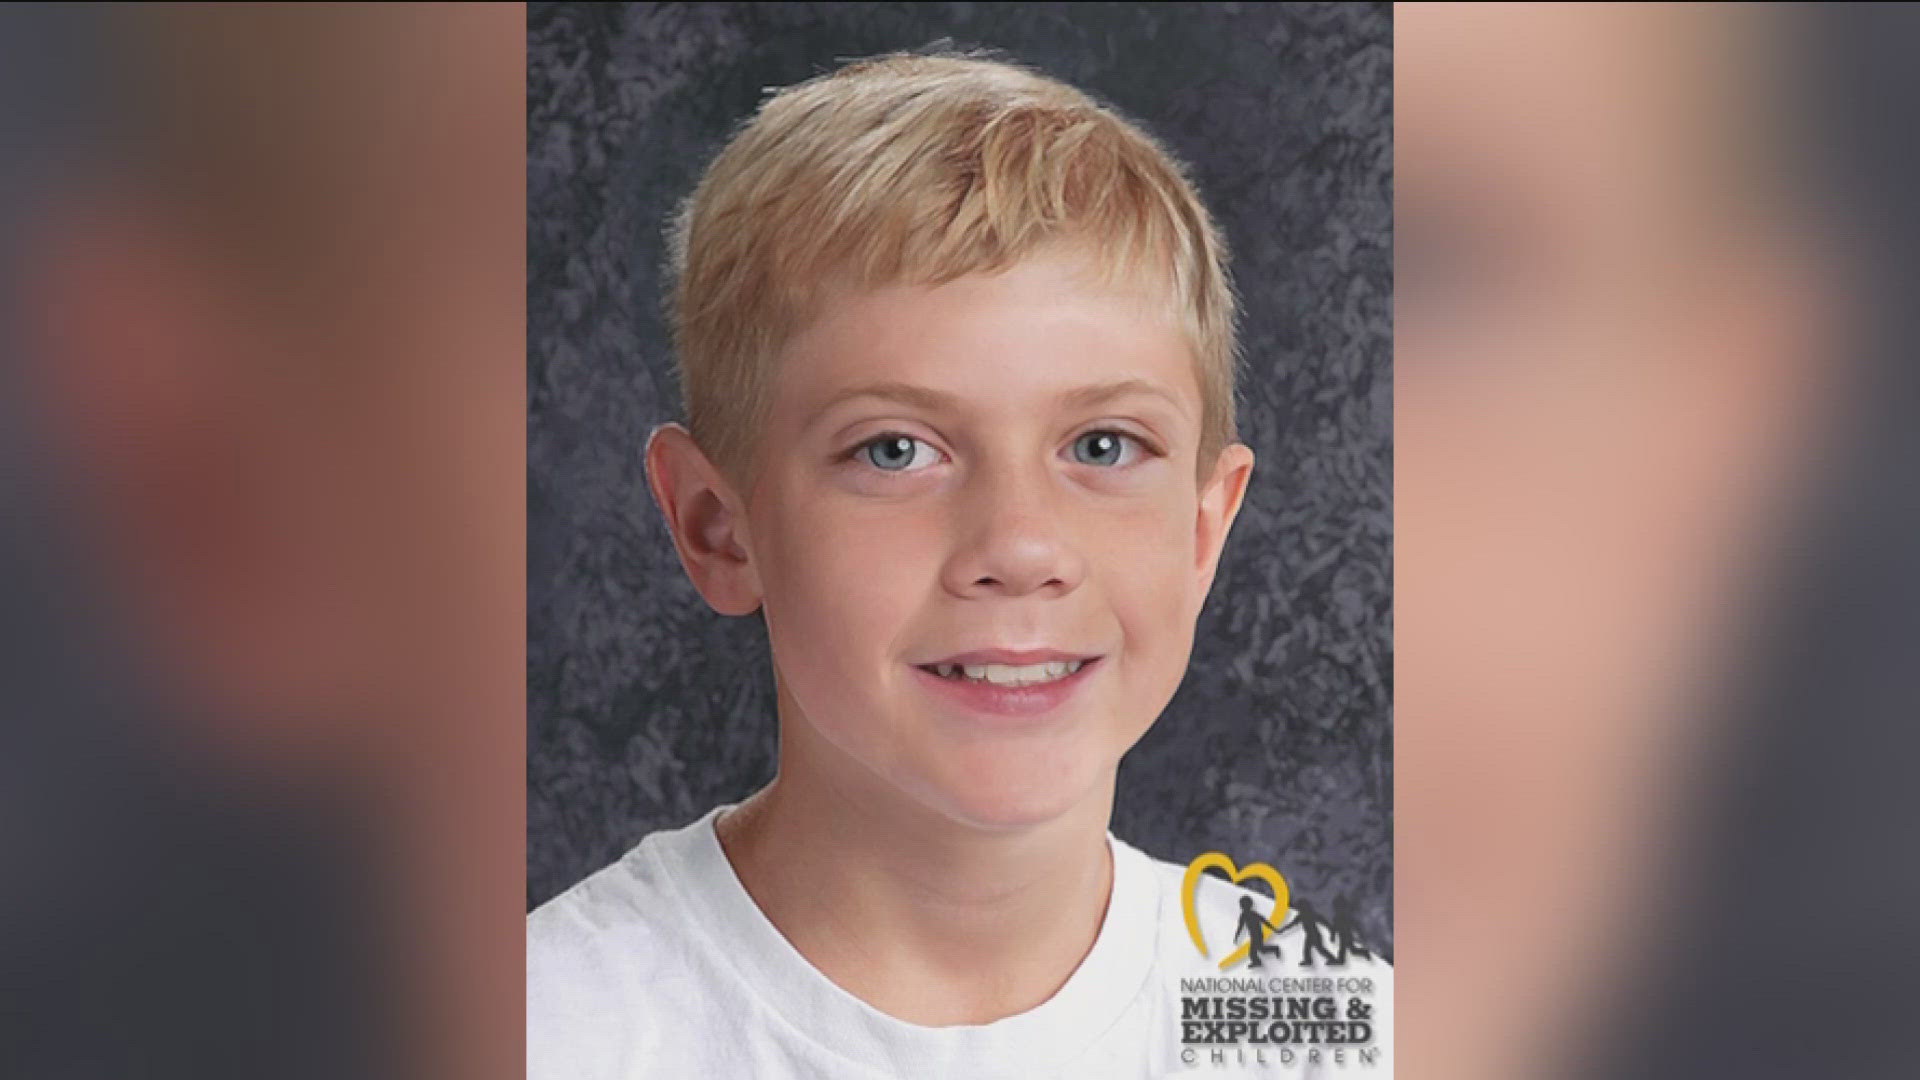 The National Center for Missing and Exploited Children released a photo of how he may look today.